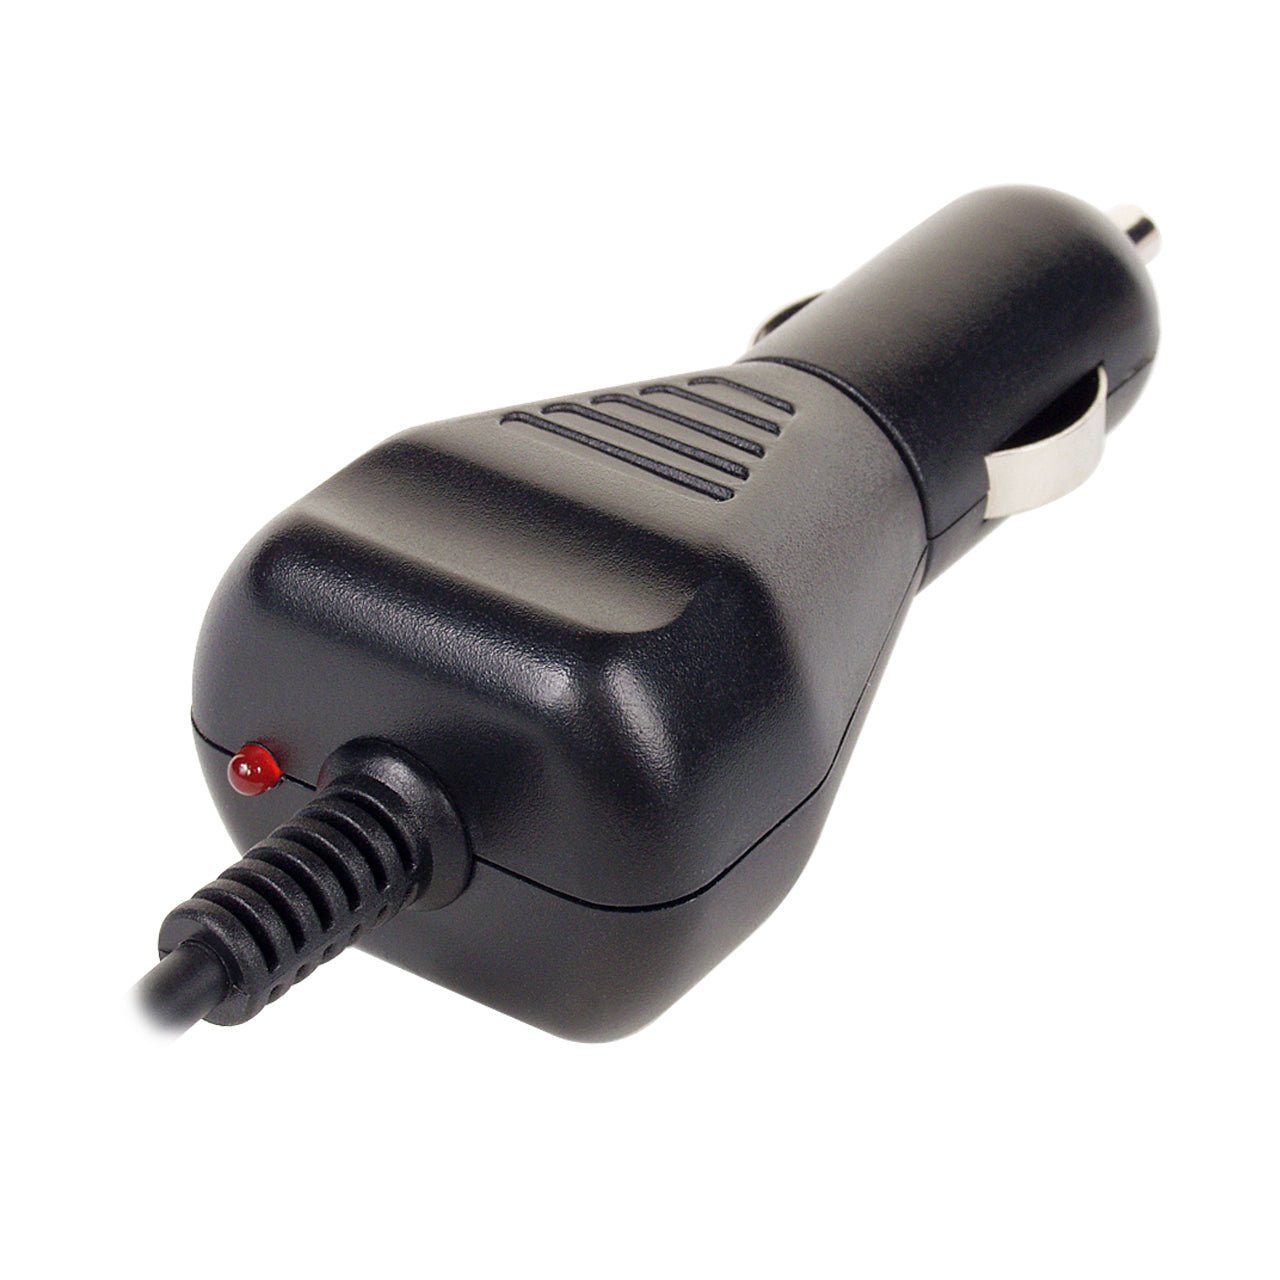 Magnadyne | Micro USB Car Charger for Smartphones, Tablets, E-Readers, and More - Magnadyne